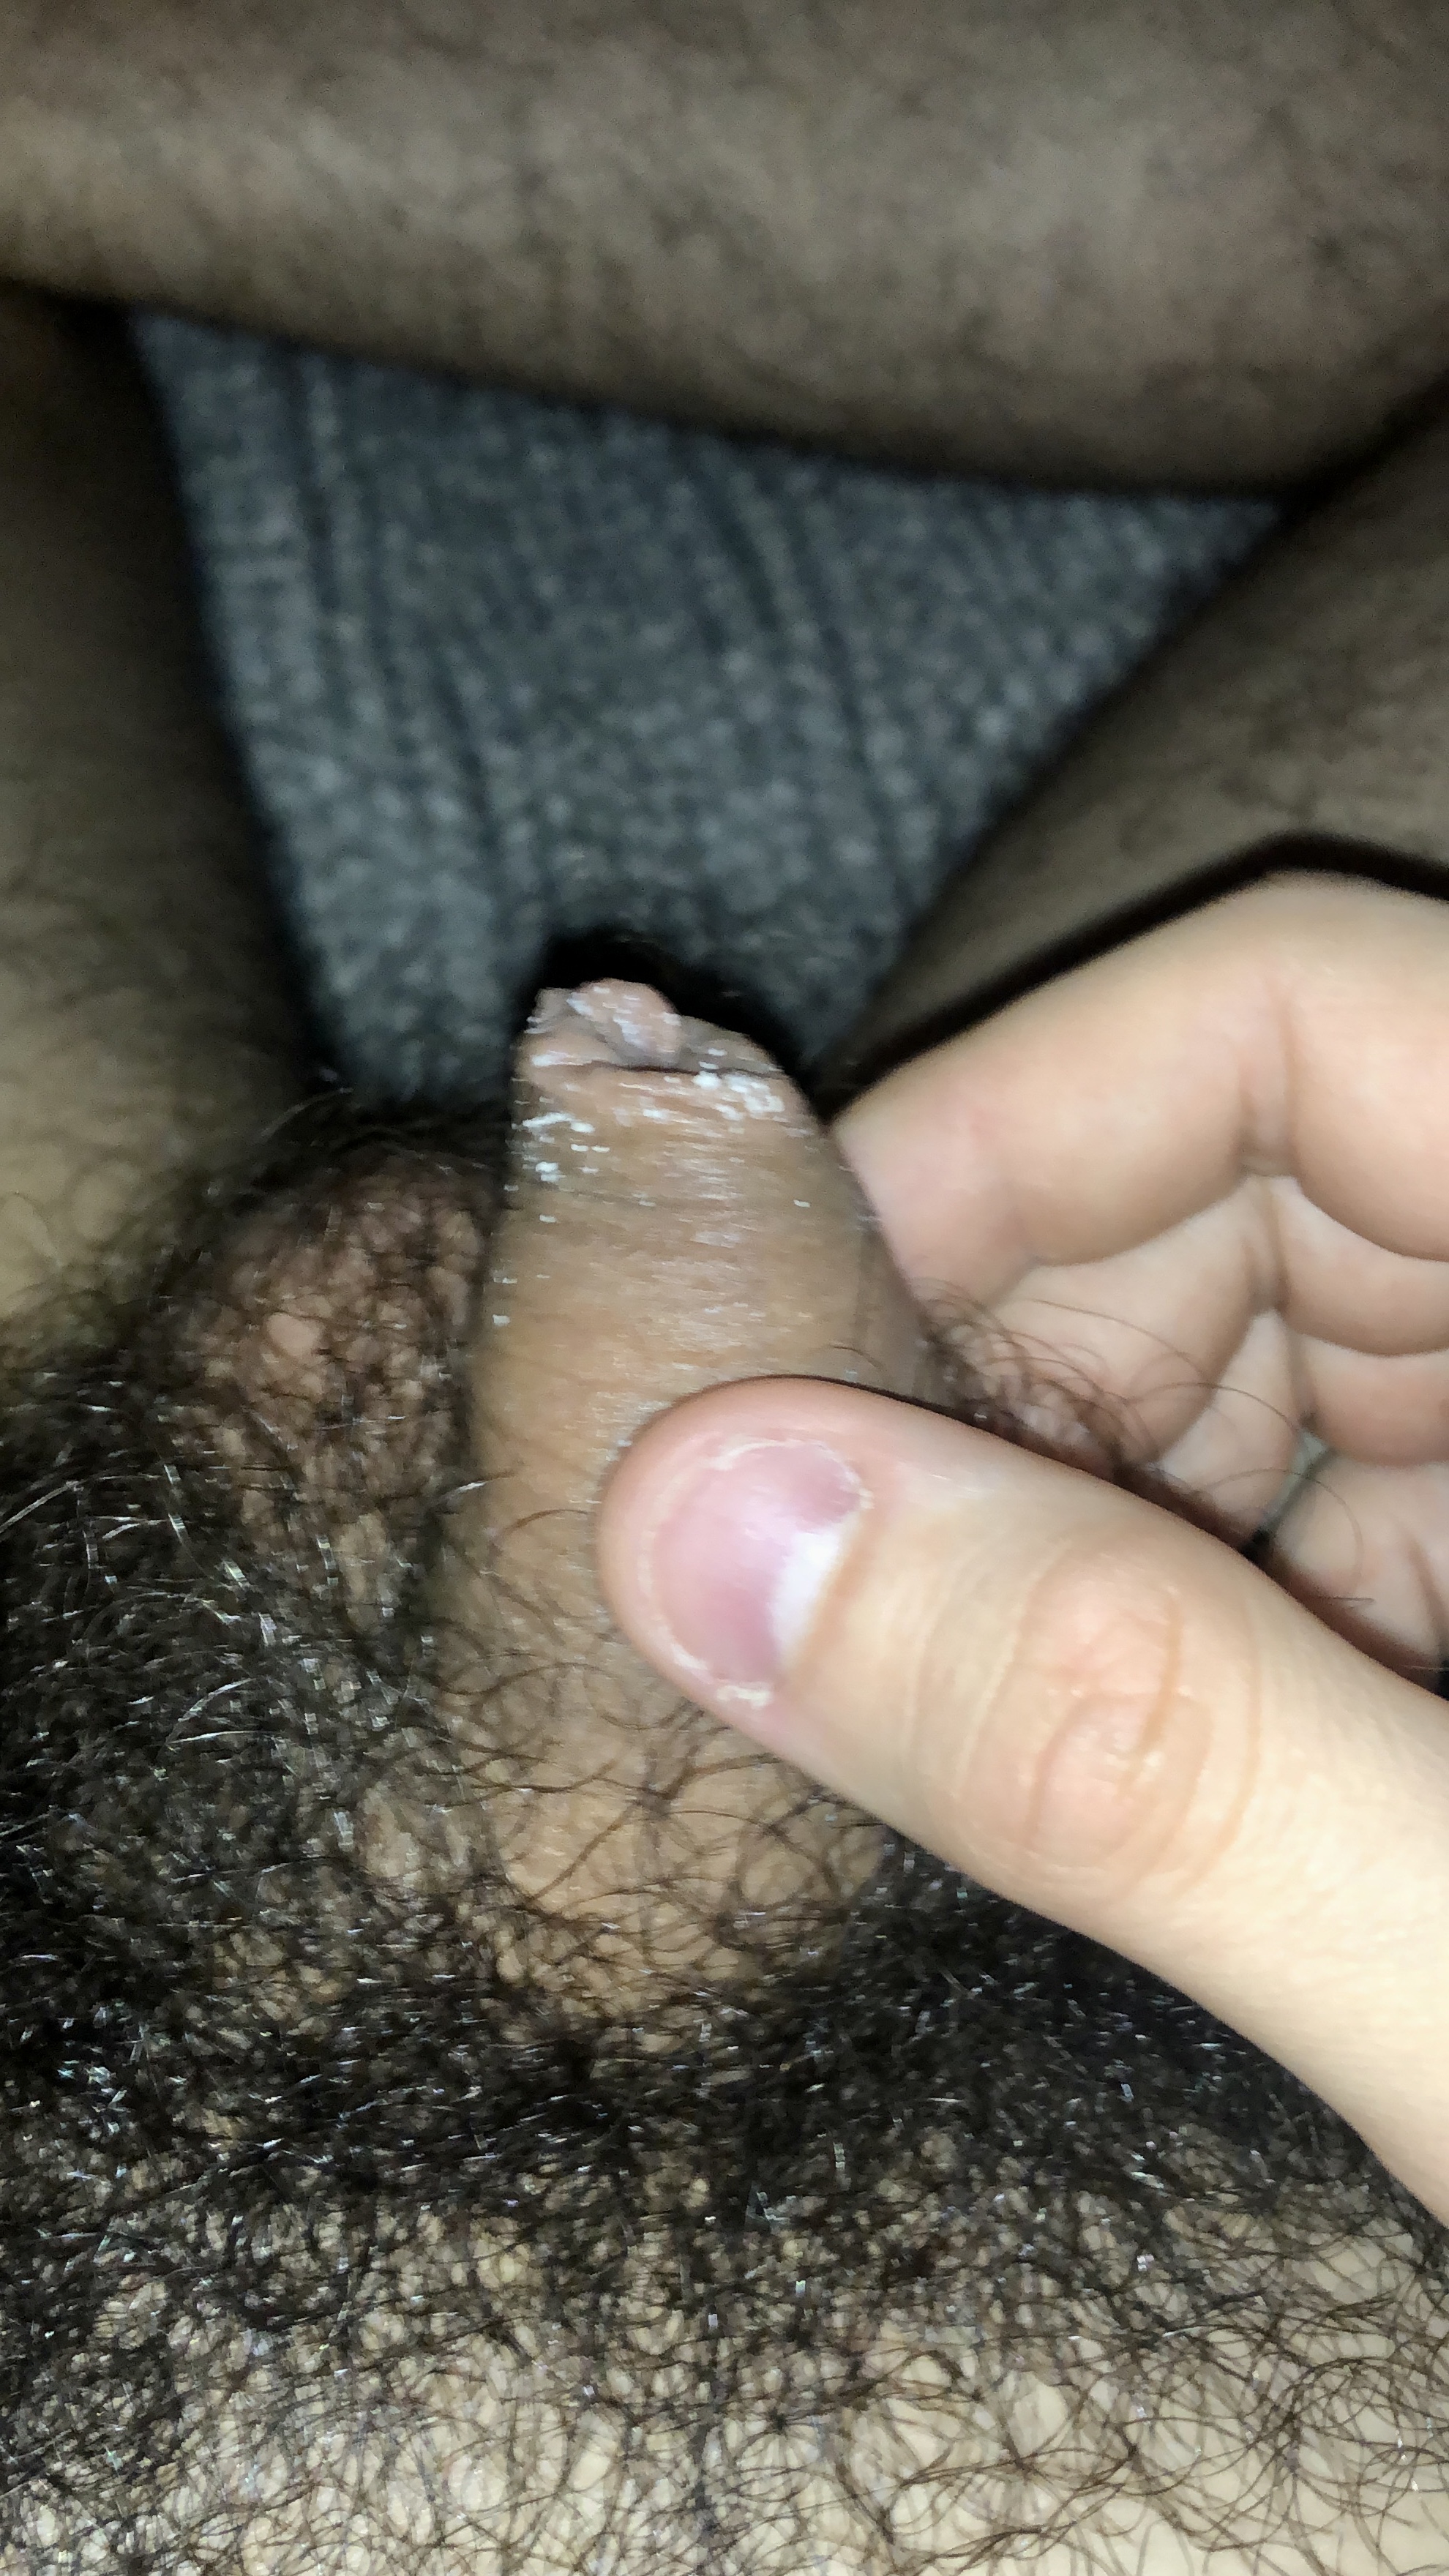 wet smelly hairy tiny dick with smegma